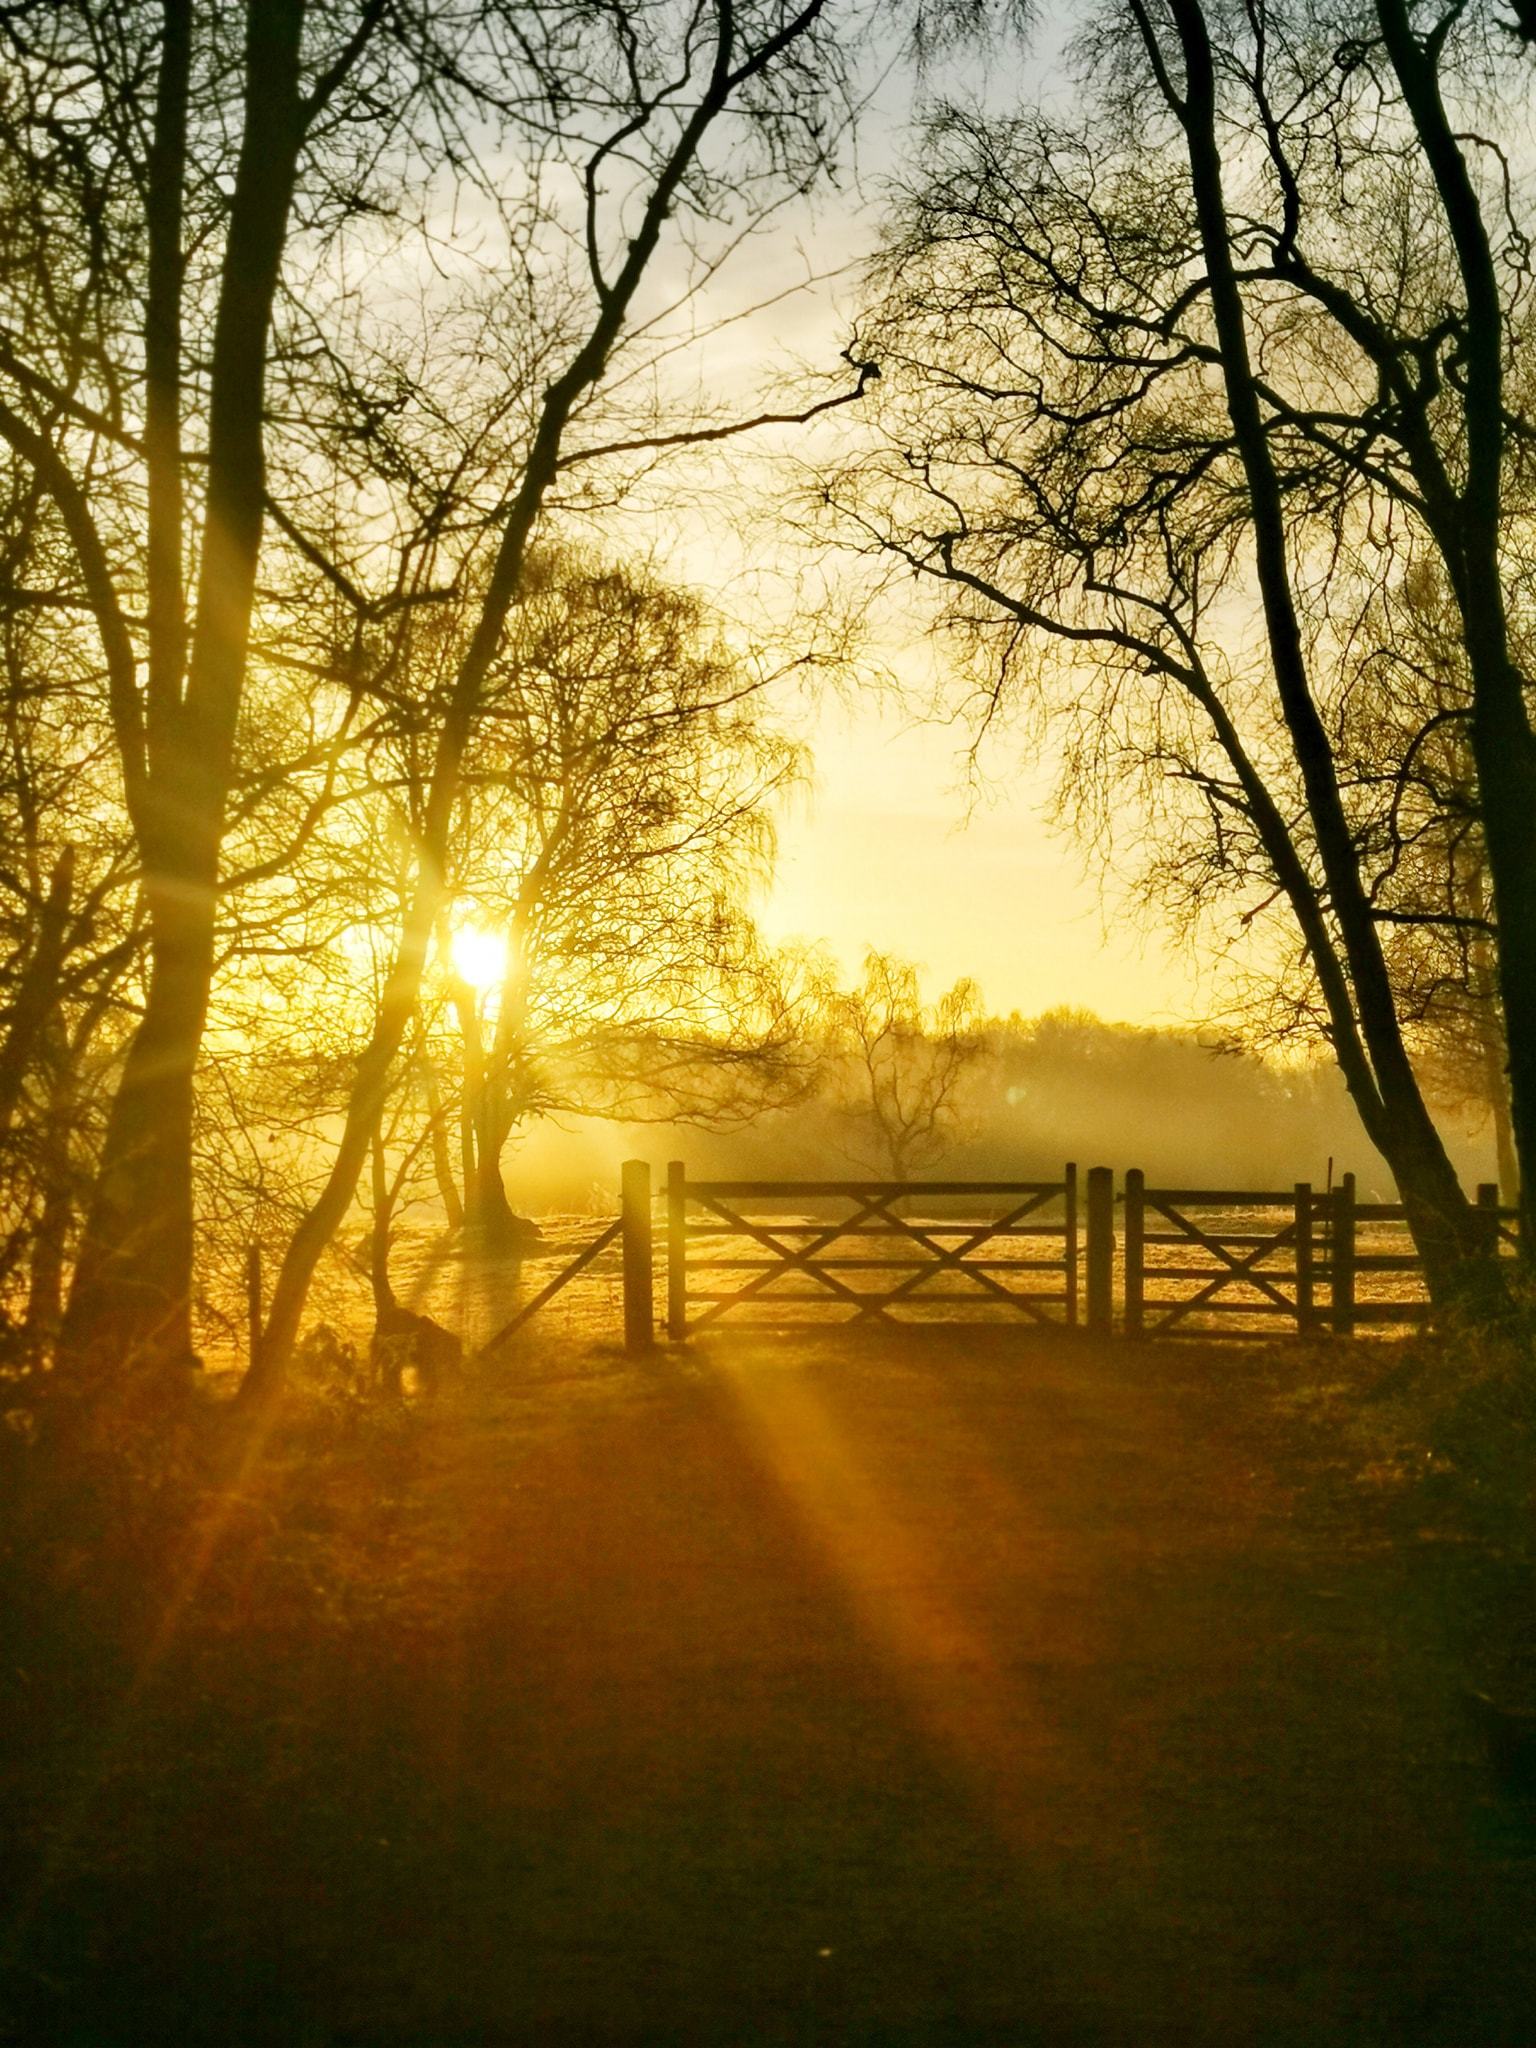 Sunrise at Marbury Park by Patricia Dyson